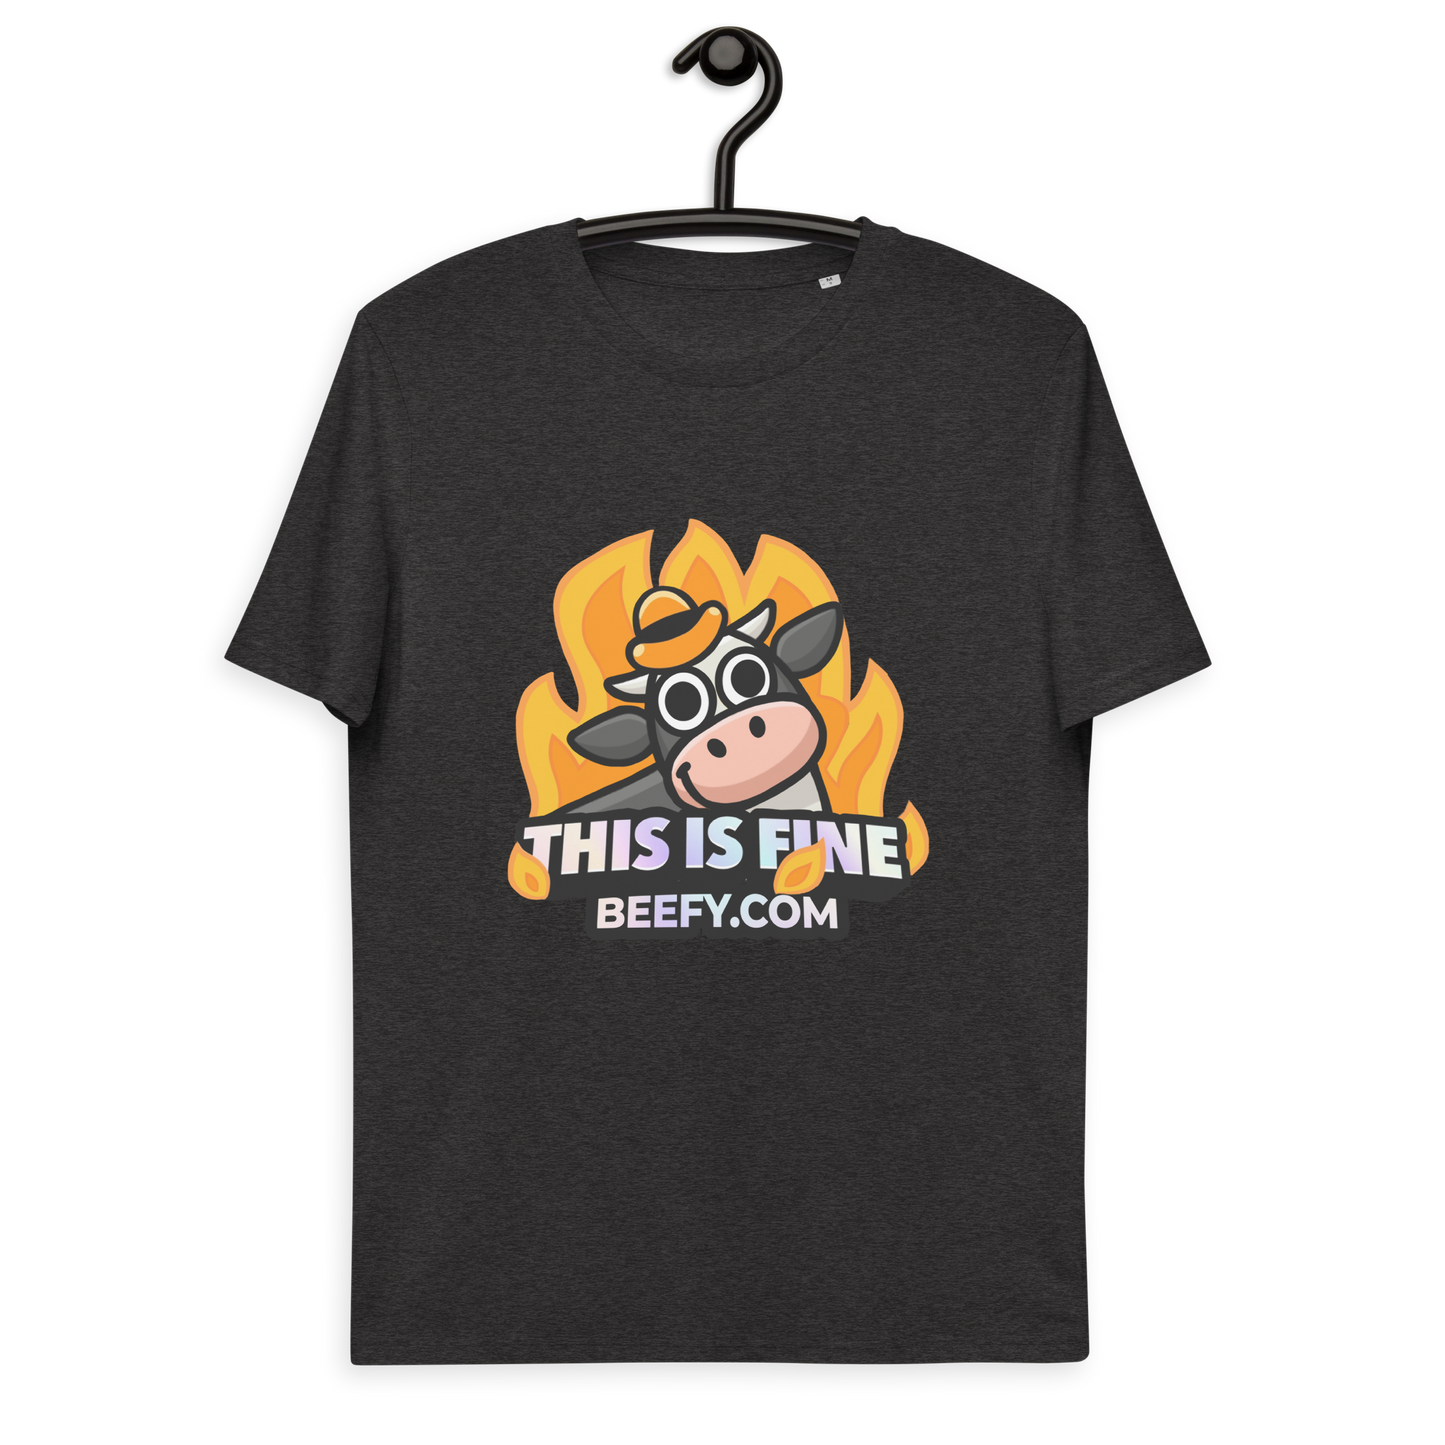 This is fine t-shirt